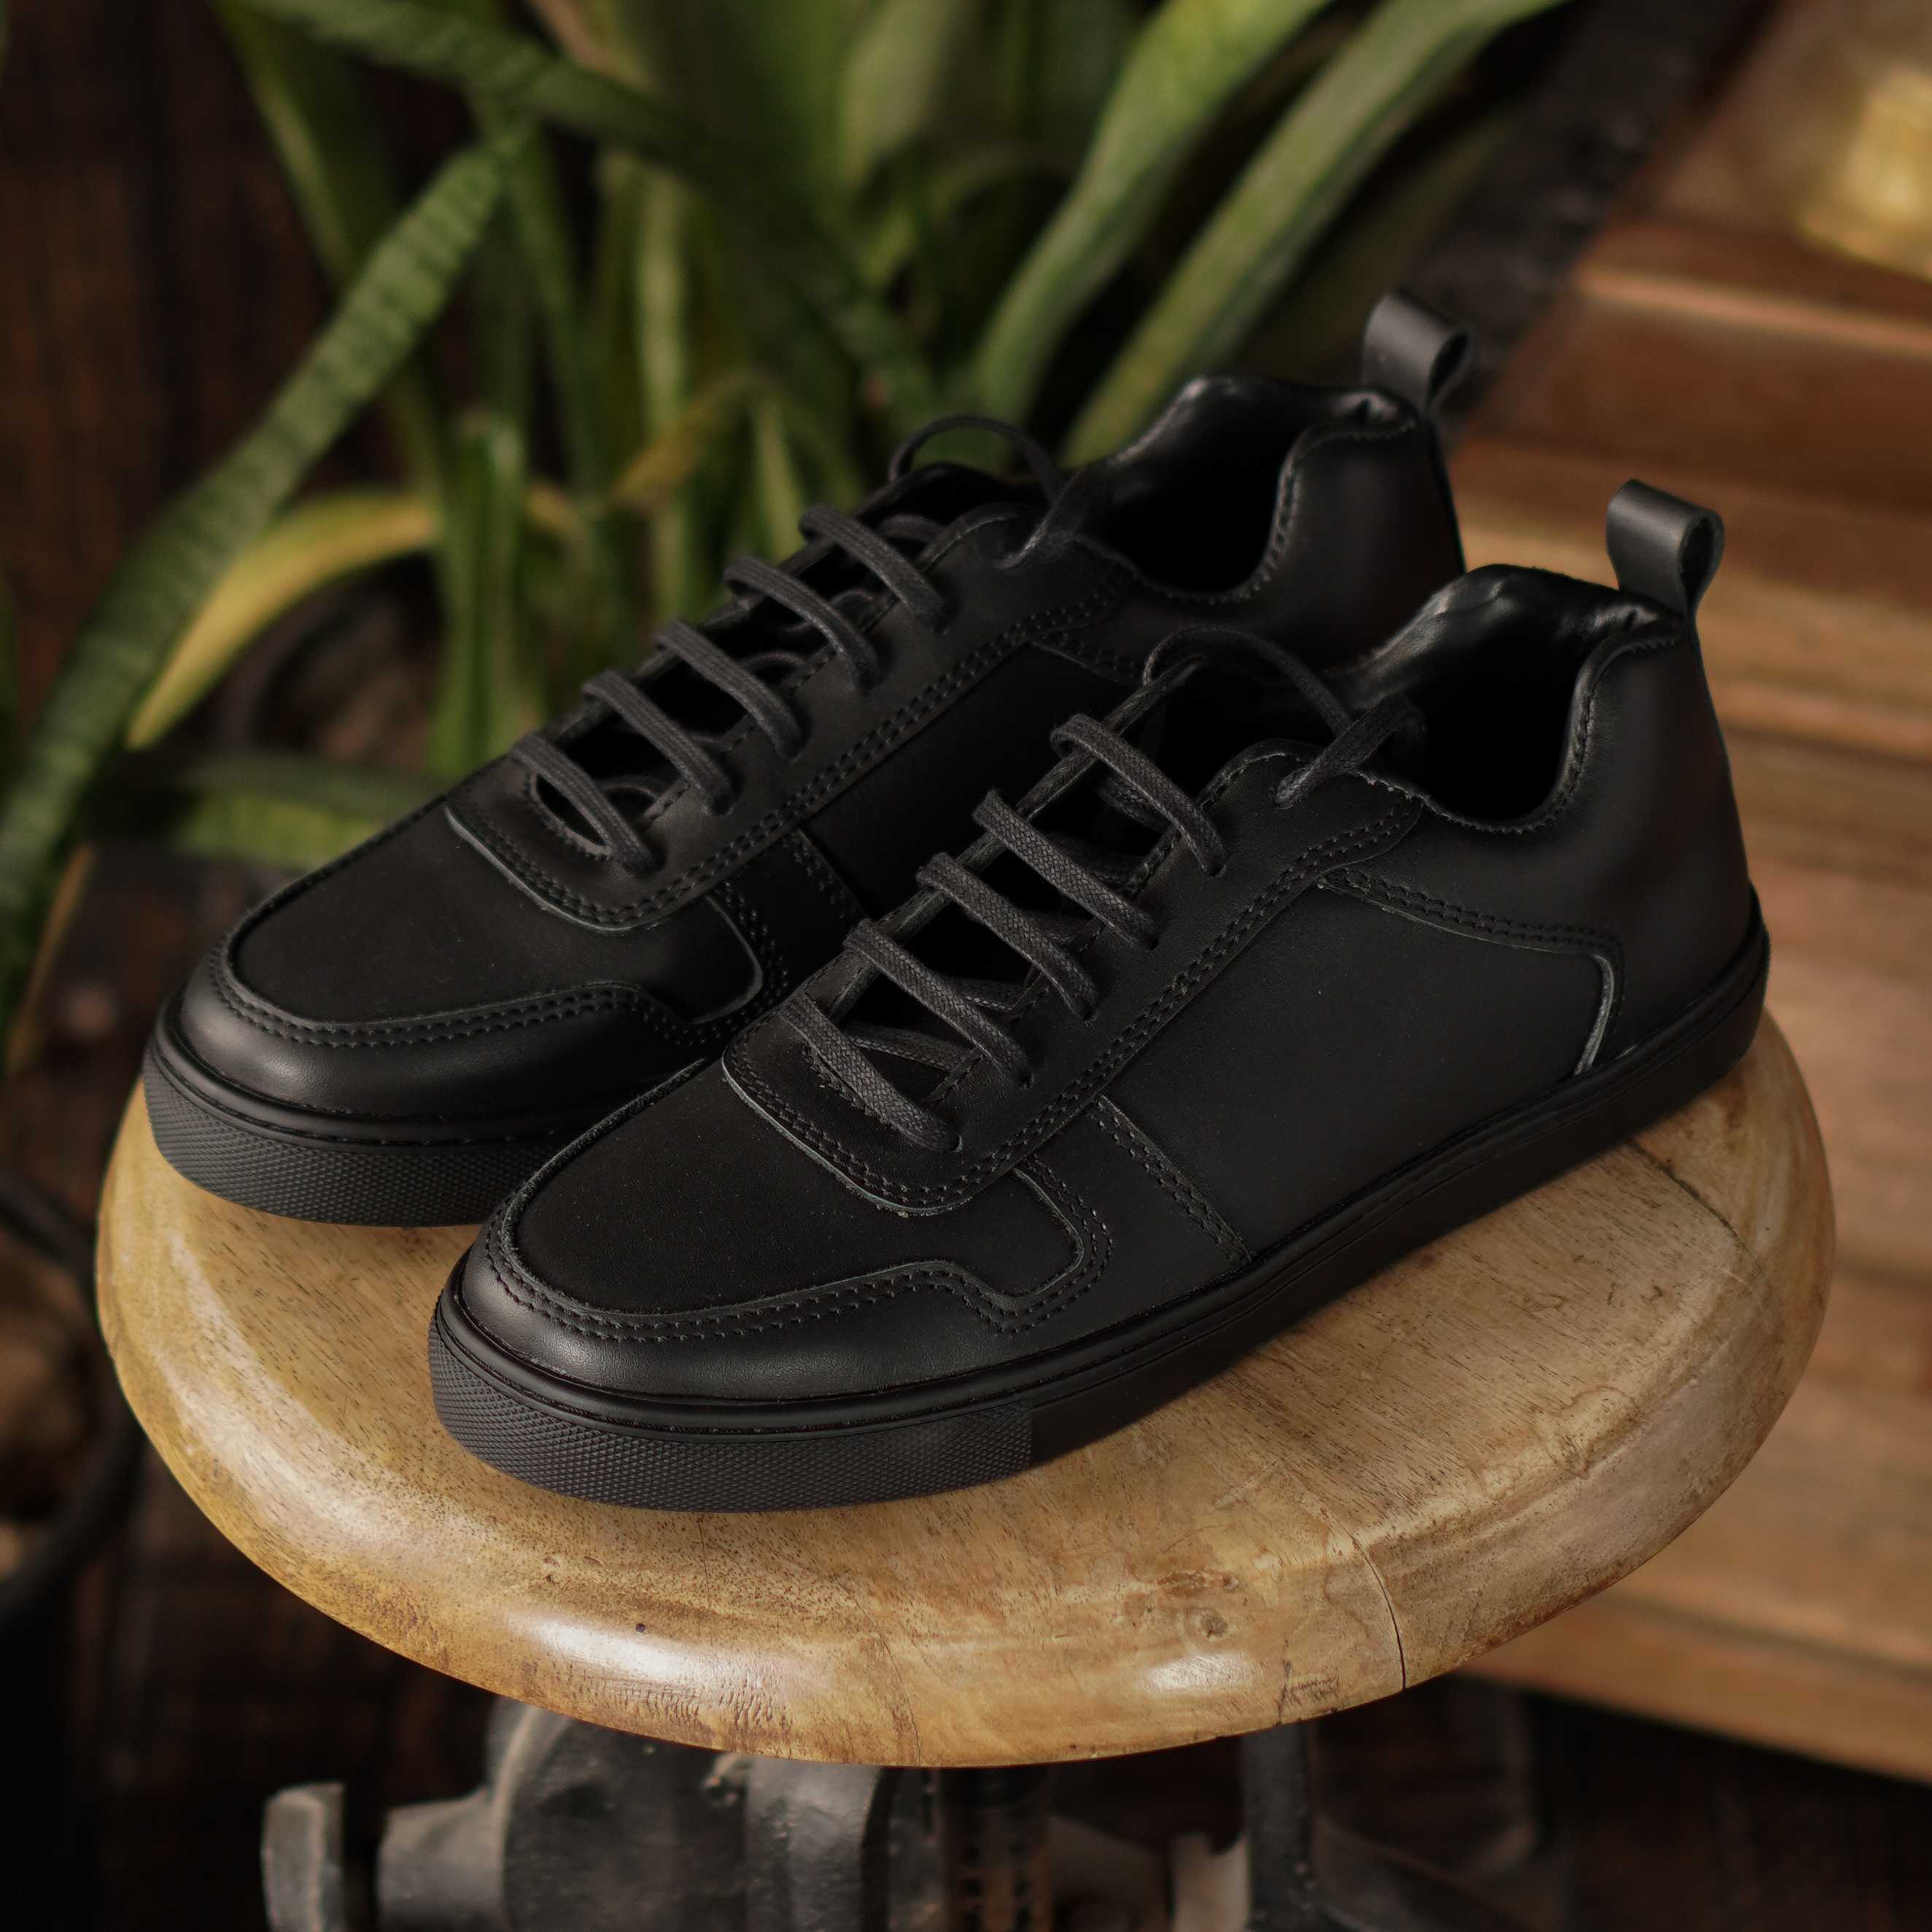 Aggregate 135+ leather sneakers shoes